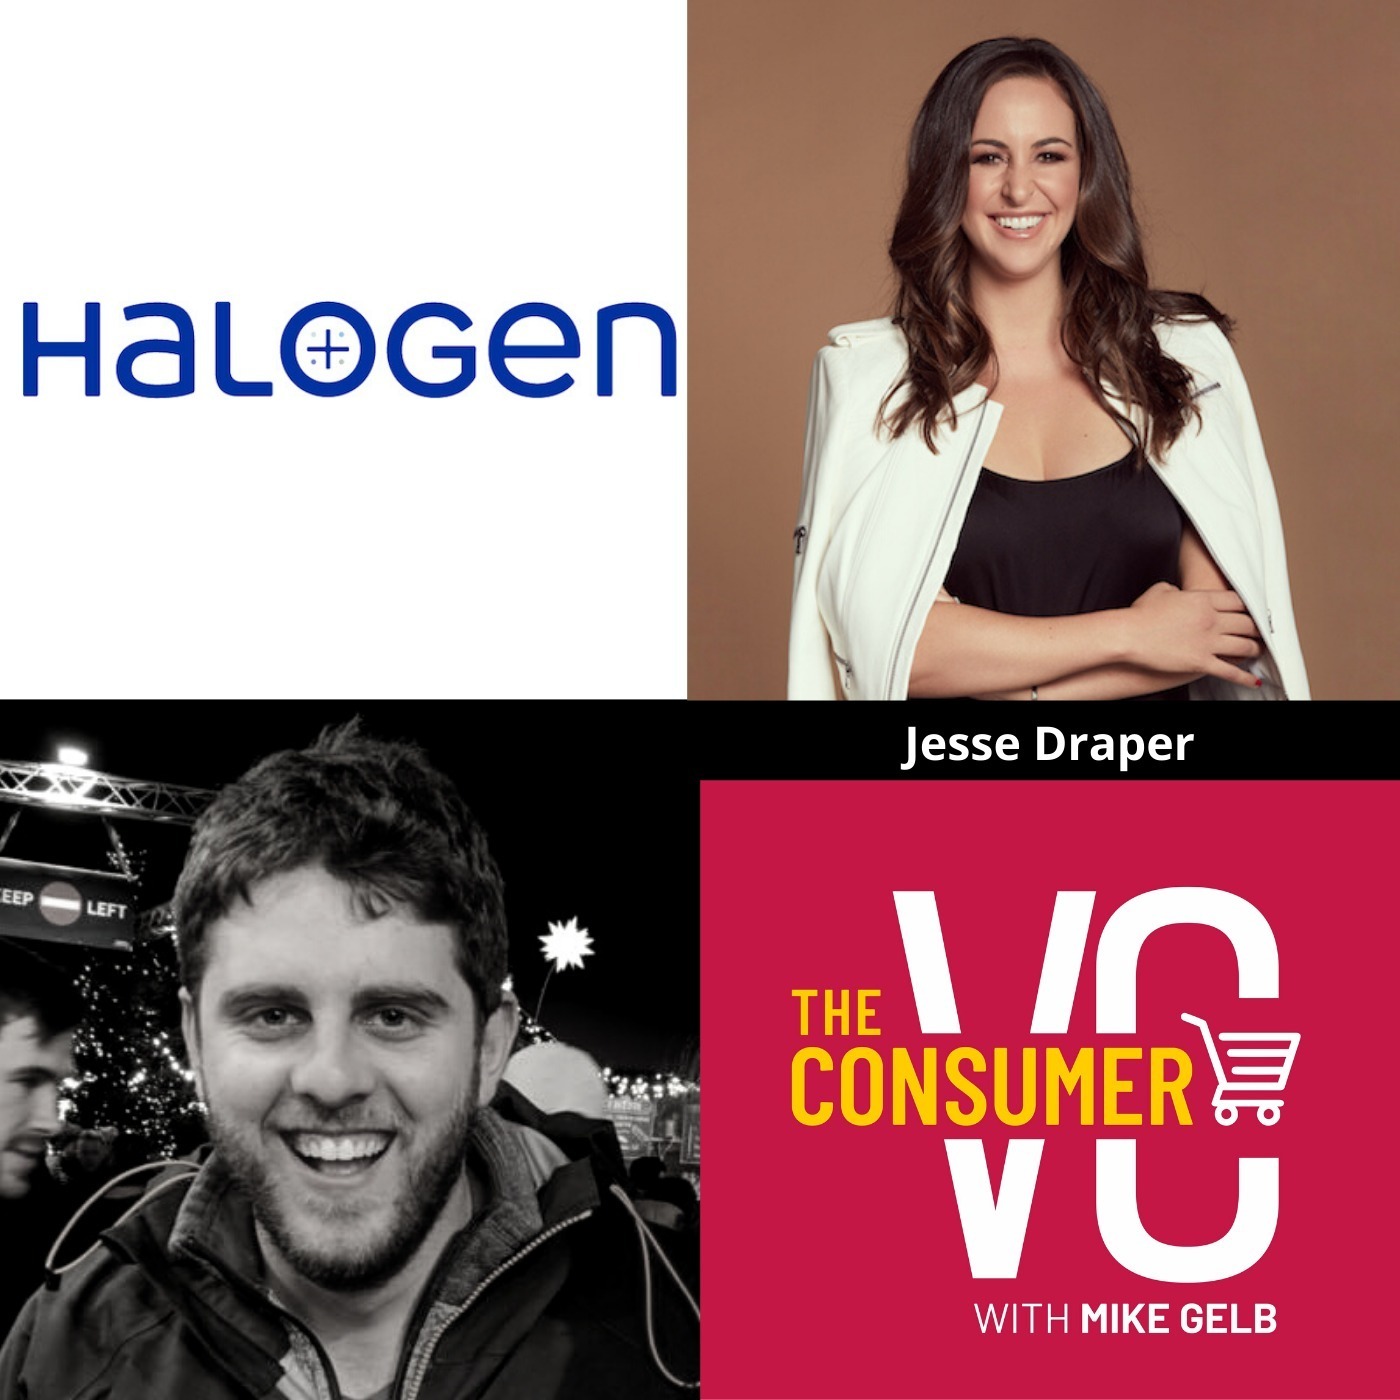 Jesse Draper (Halogen) - Why Investing In Female Led Businesses is Such a Massive Opportunity, Los Angeles Consumer Tech Scene, and Consuming Meaningful Content